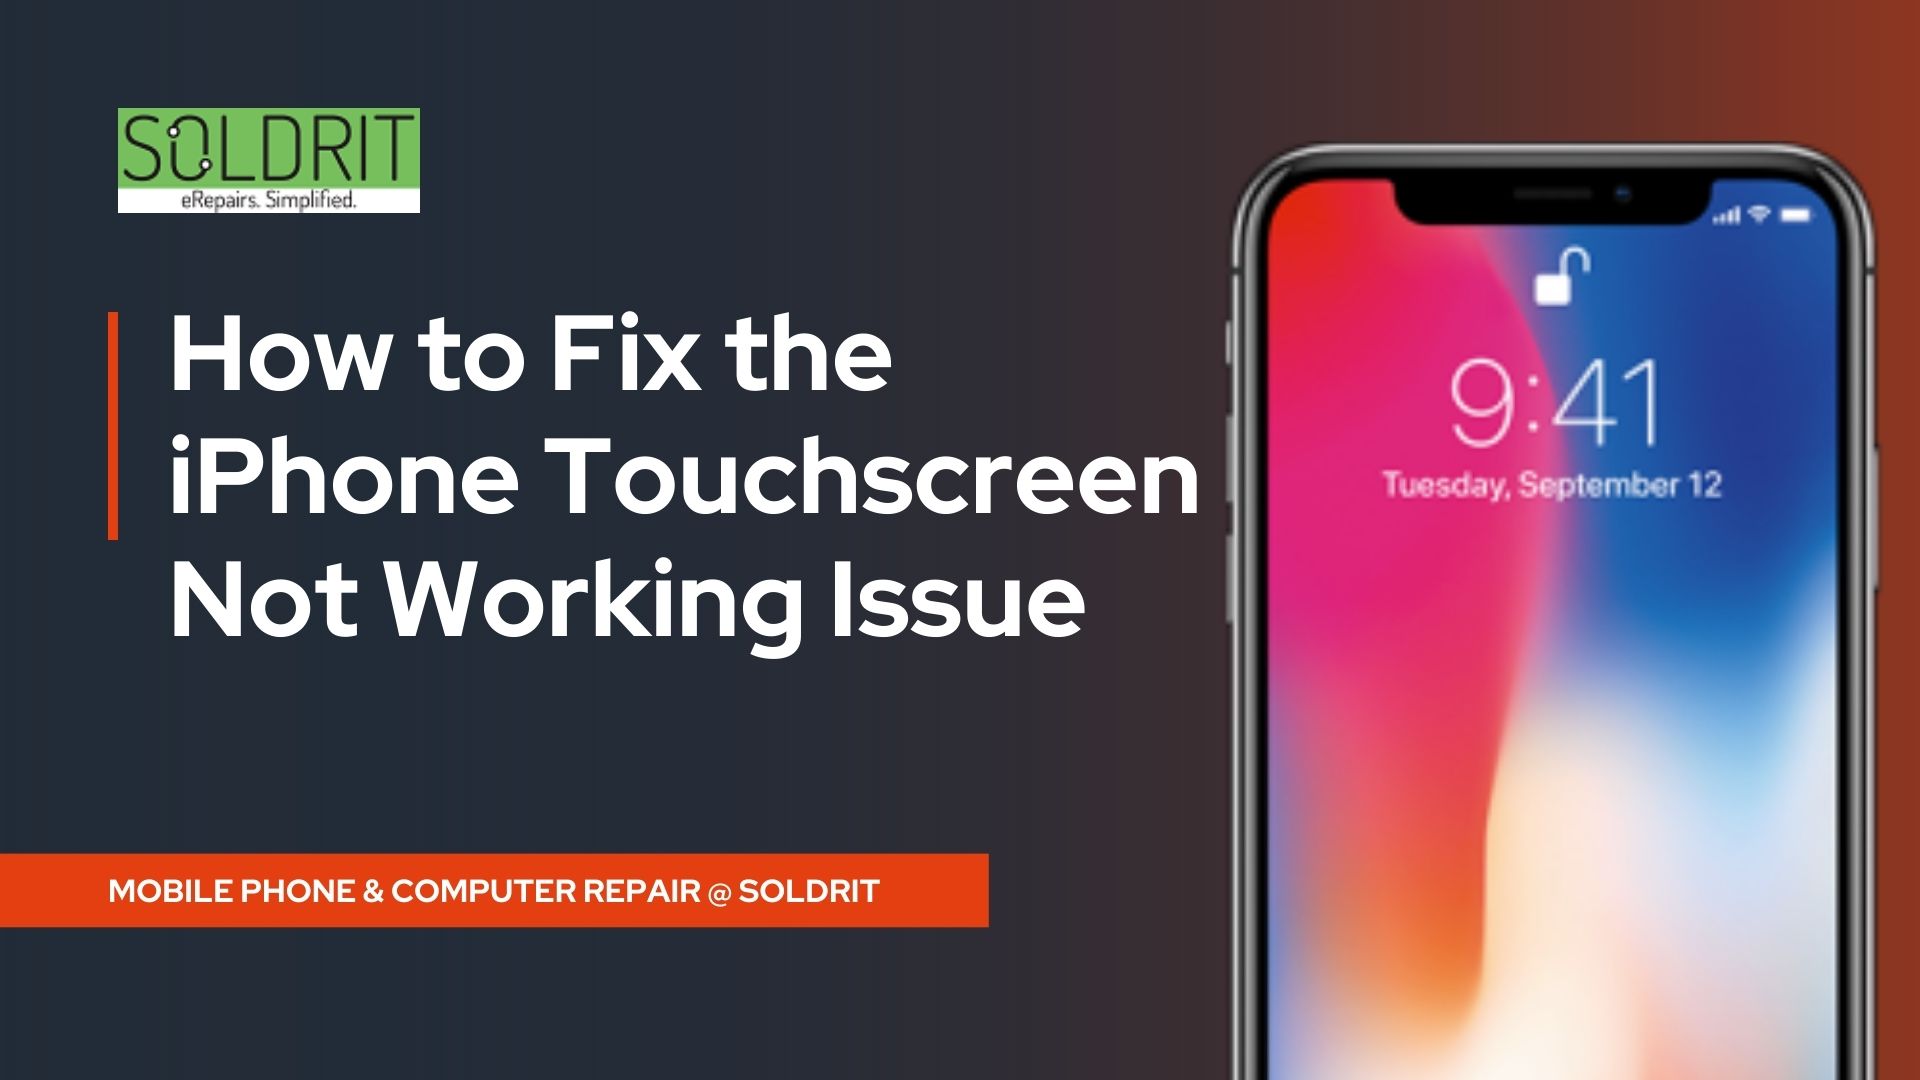 How To Fix The iPhone Touchscreen Not Working Issue